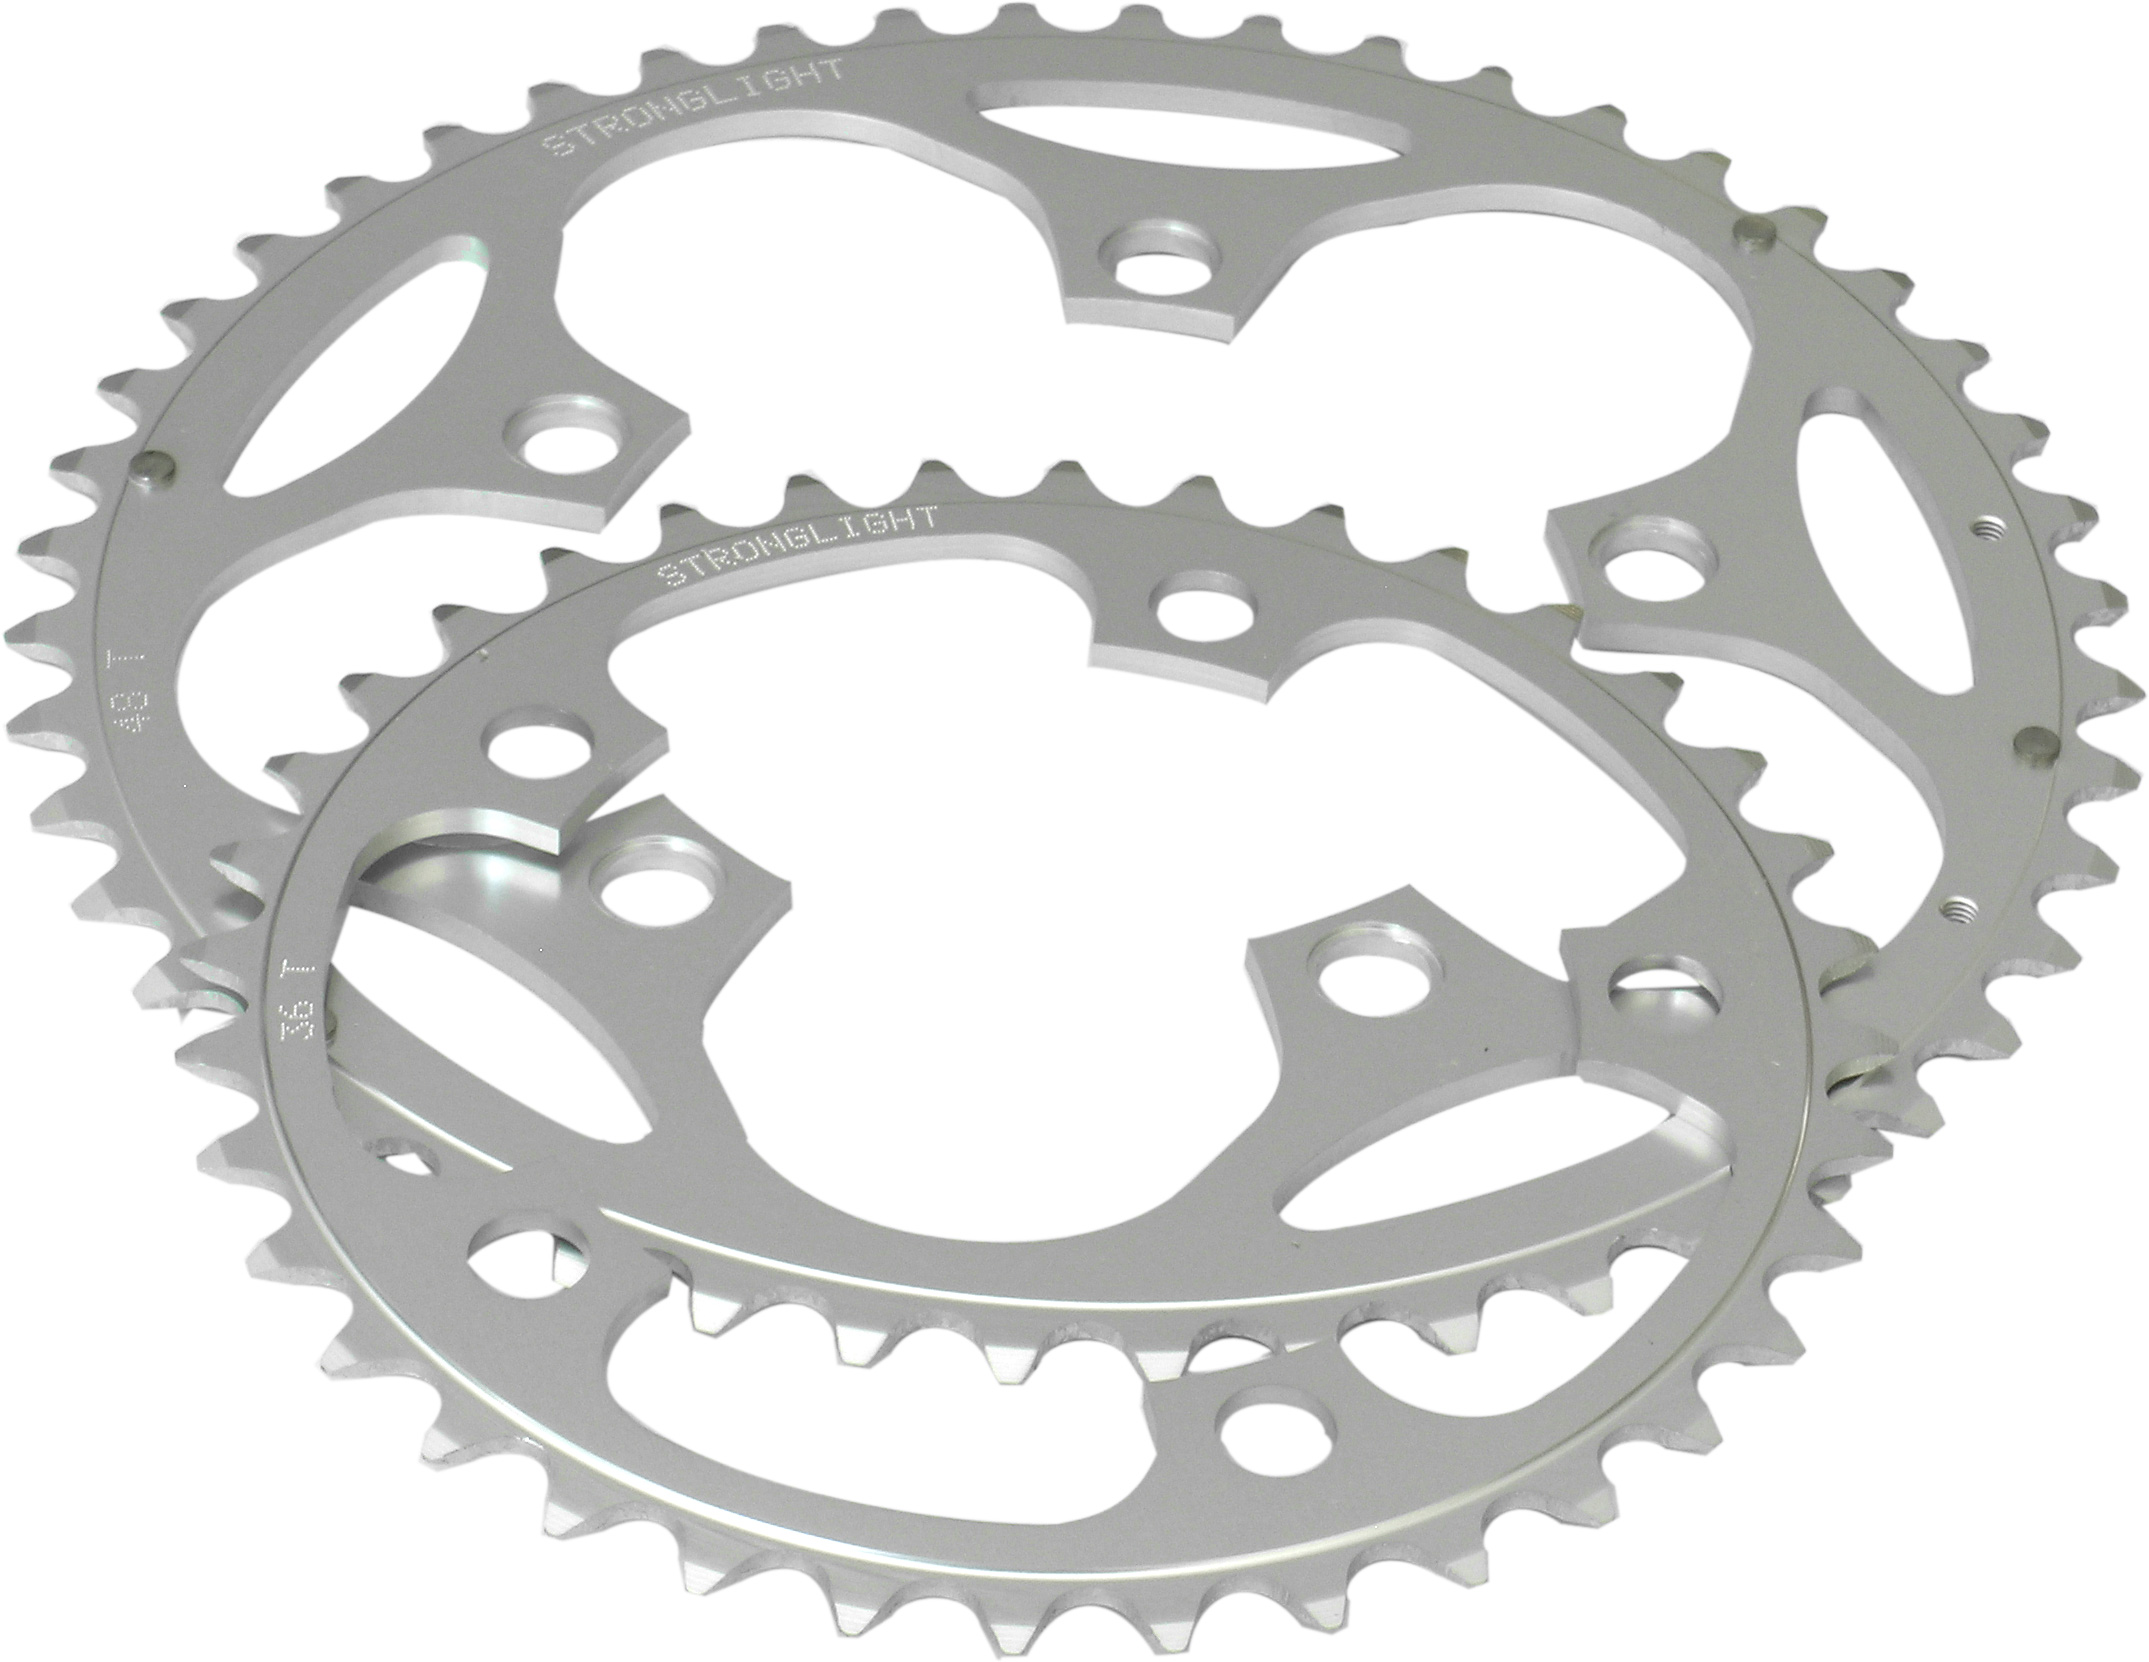 RD11038S Stronglight 38T Silver 5-Arm Alloy Chainring